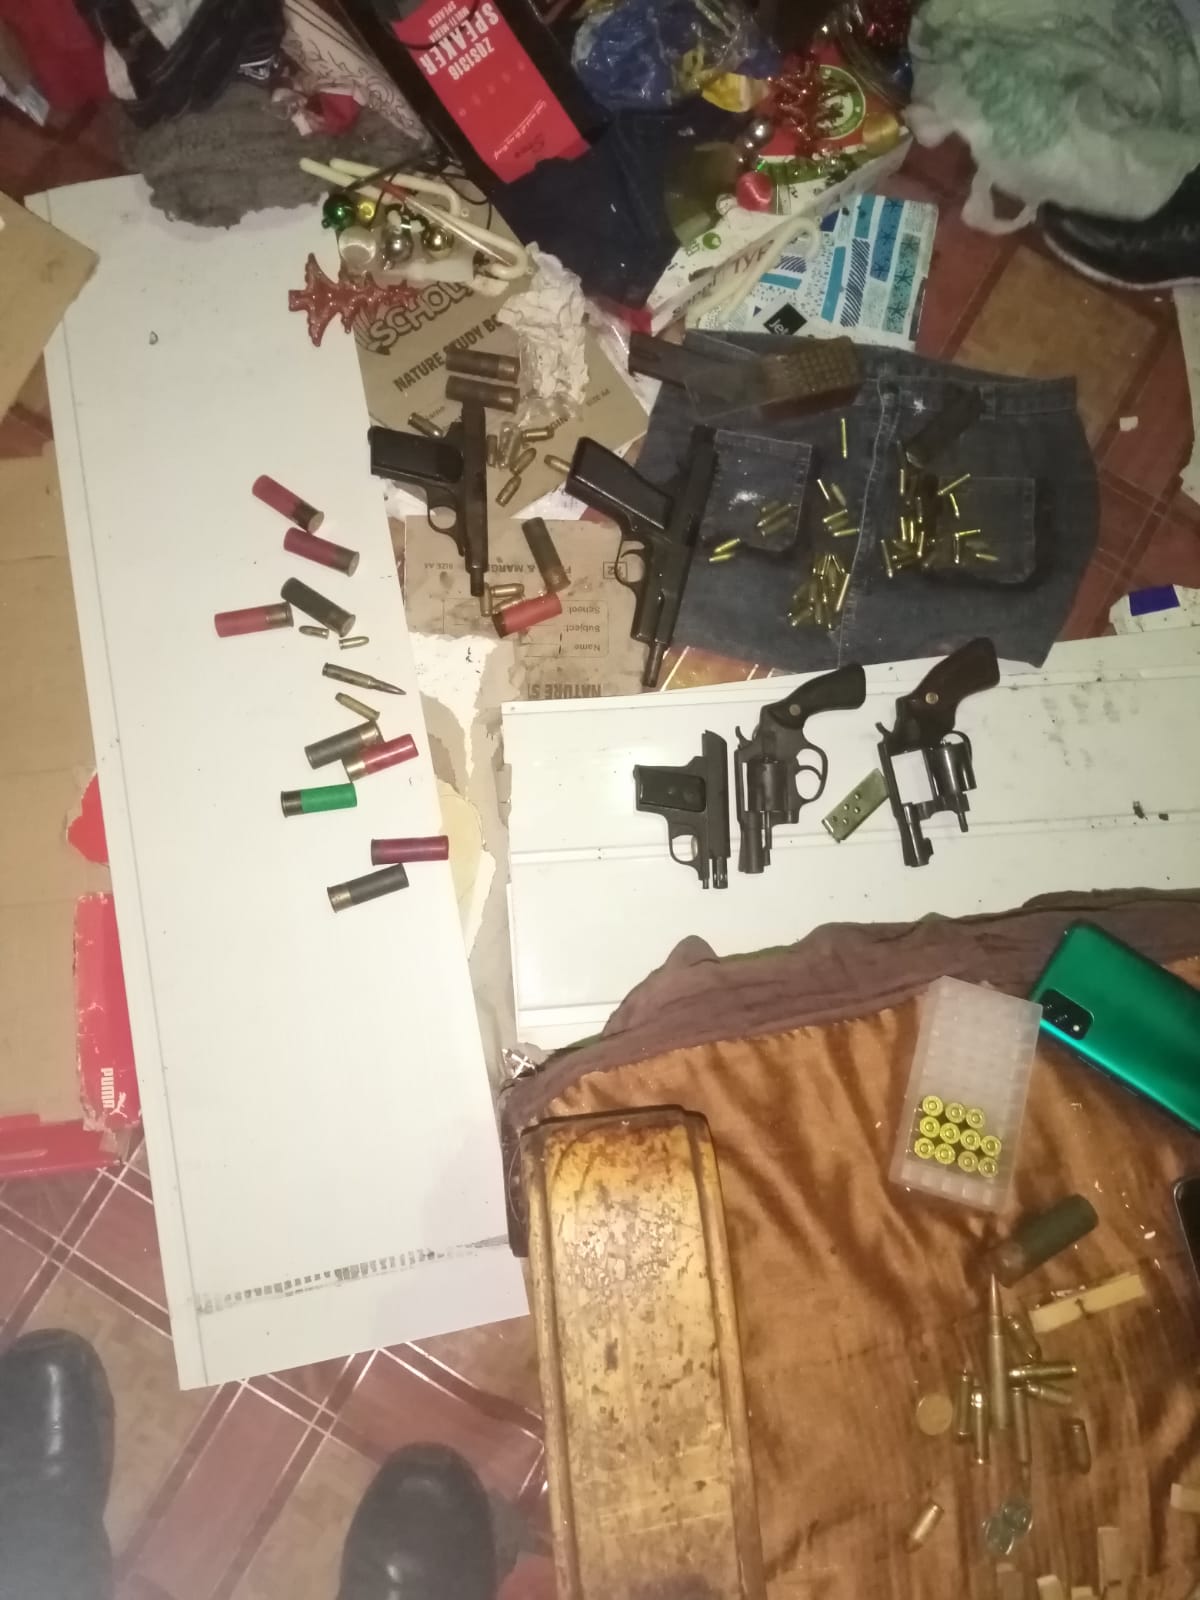 Nelson Mandela Bay police track down wanted suspect, recover guns and drugs